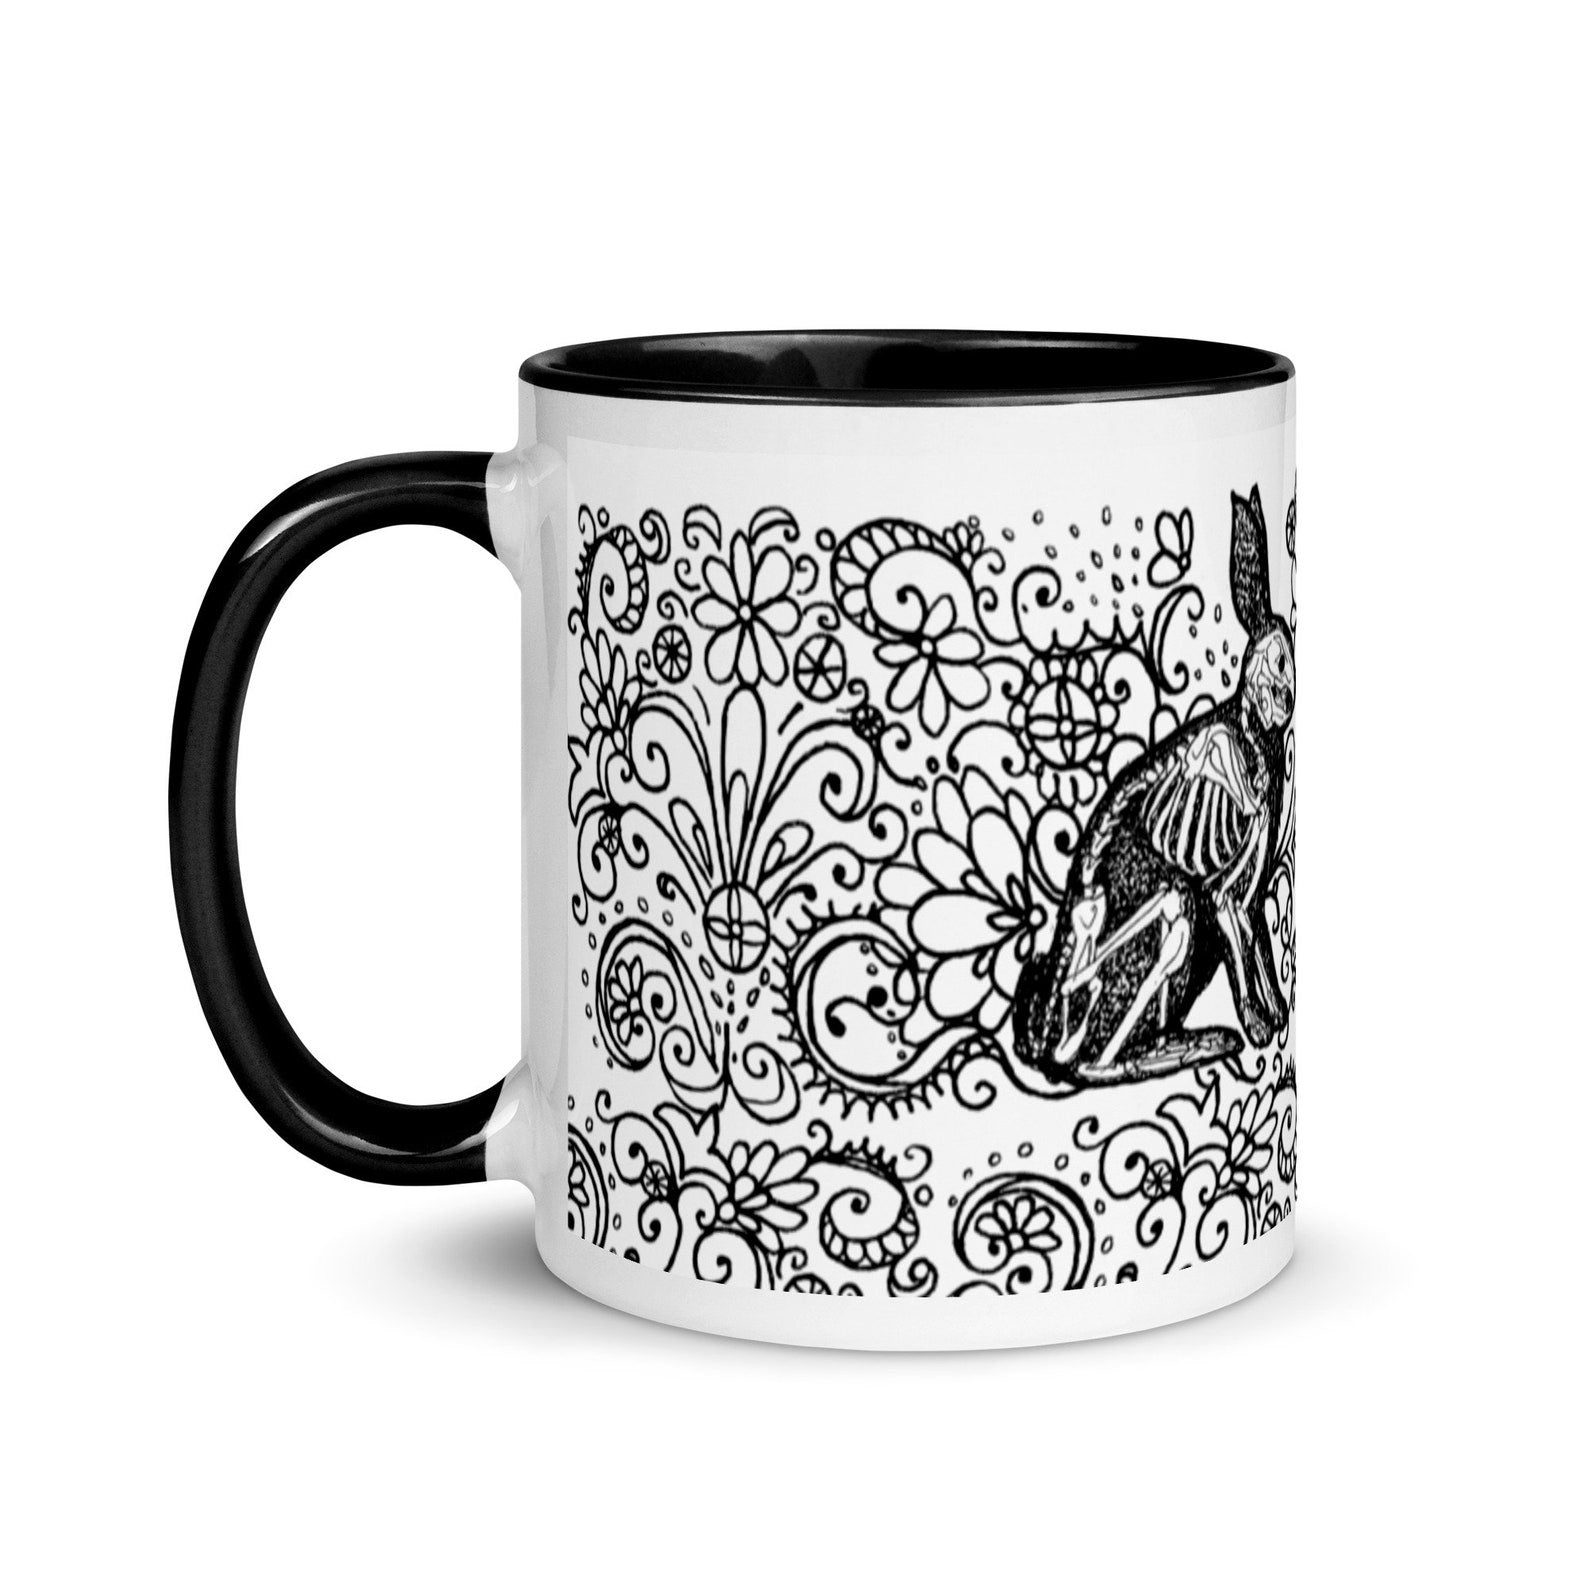 ceramic halloween mug. Two black bunny rabbit silhouettes with their skeletons visible, on a field of elaborate, black, floral swirls on a white background. Side view showing a black handle.